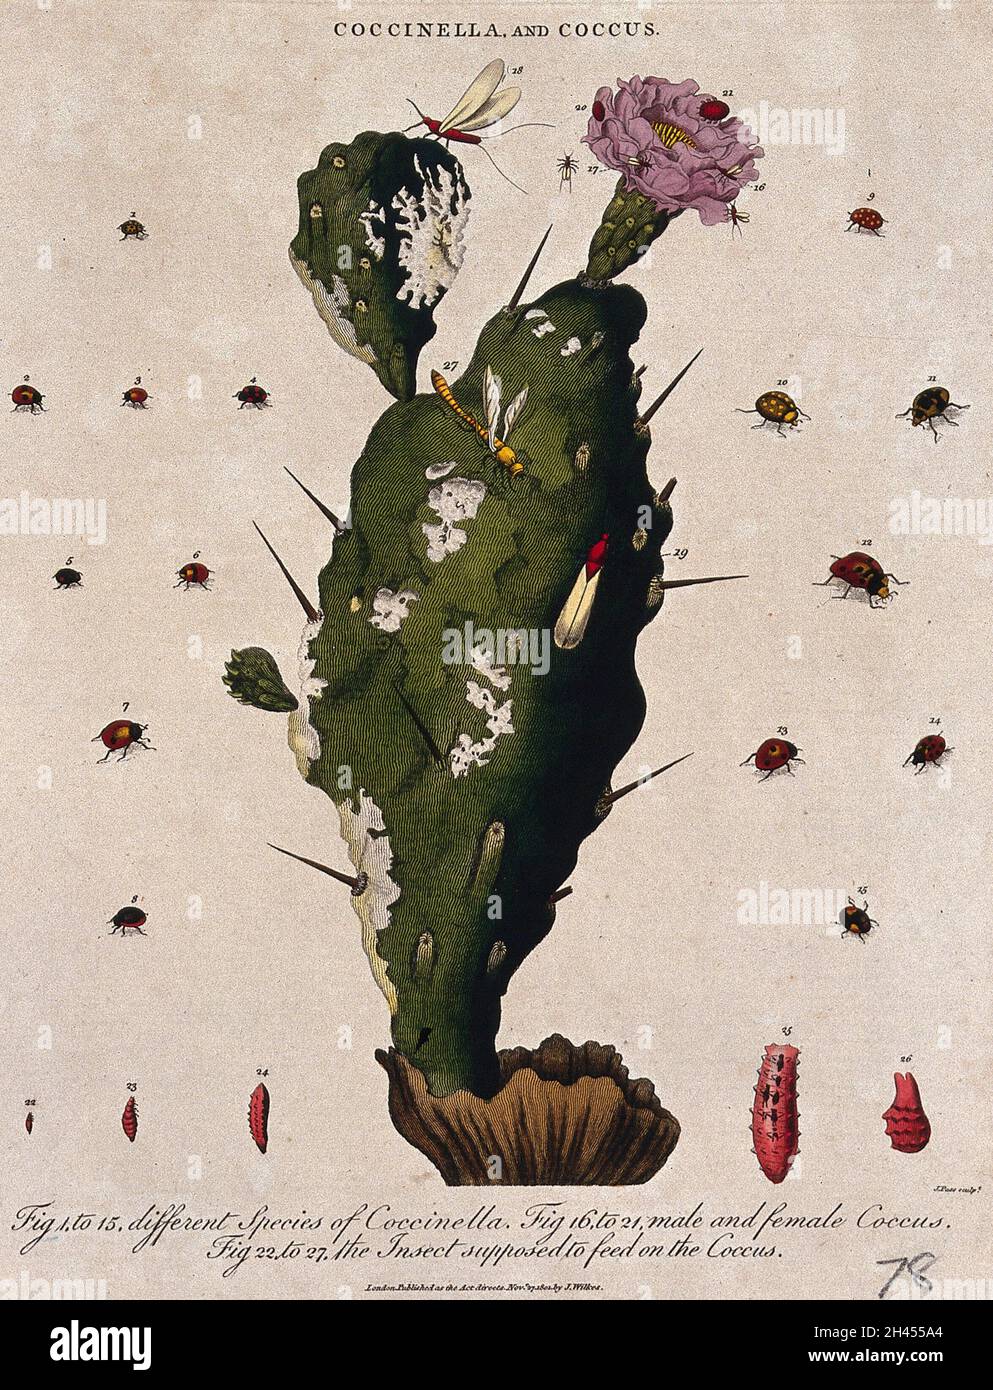 Cochineal cactus (Nopalea cochenillifera) with insects that feed on it, including th cochineal insect (Dactylopius coccus). Coloured etching by J. Pass, c. 1801, after J. Ihle. Stock Photo